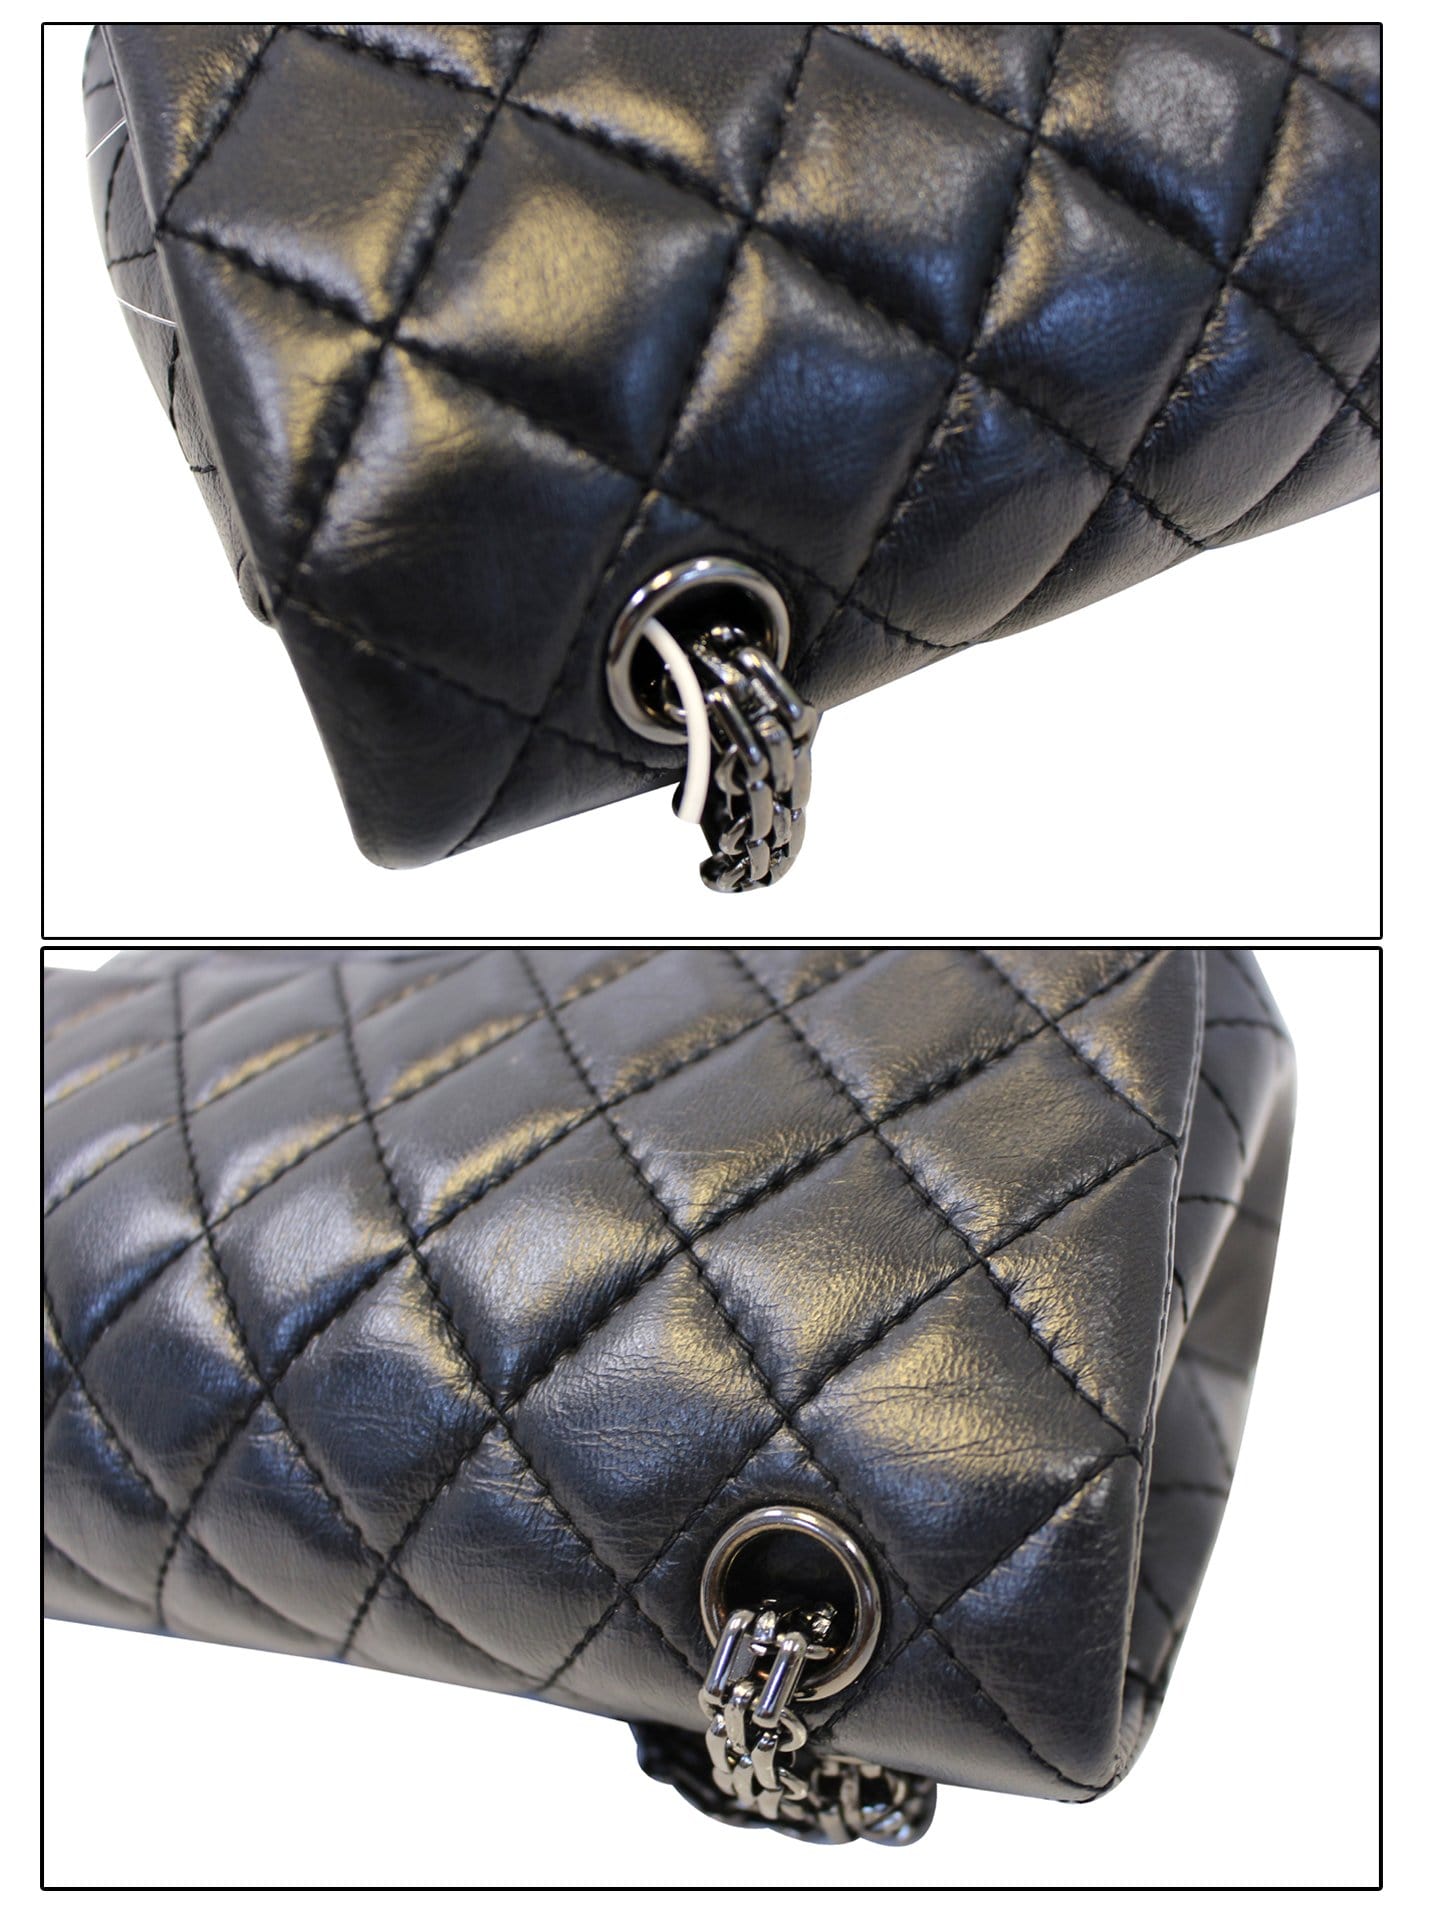 Chanel 2.55 Reissue Double Flap Lambskin Black with Silver Hardware